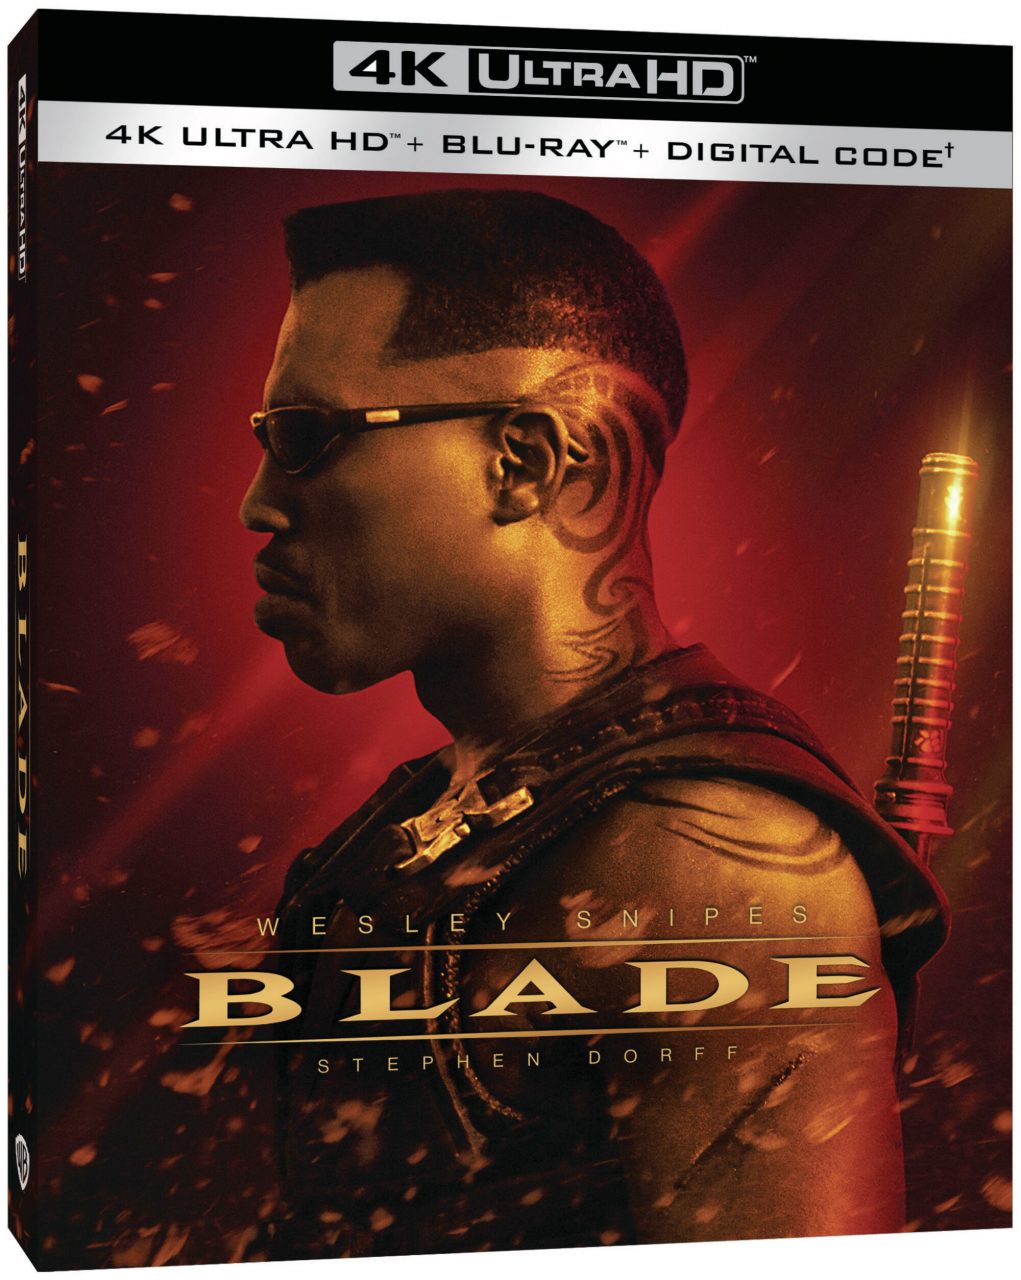 Blade 4K Ultra HD Combo Pack cover (Warner Bros. Home Entertainment)